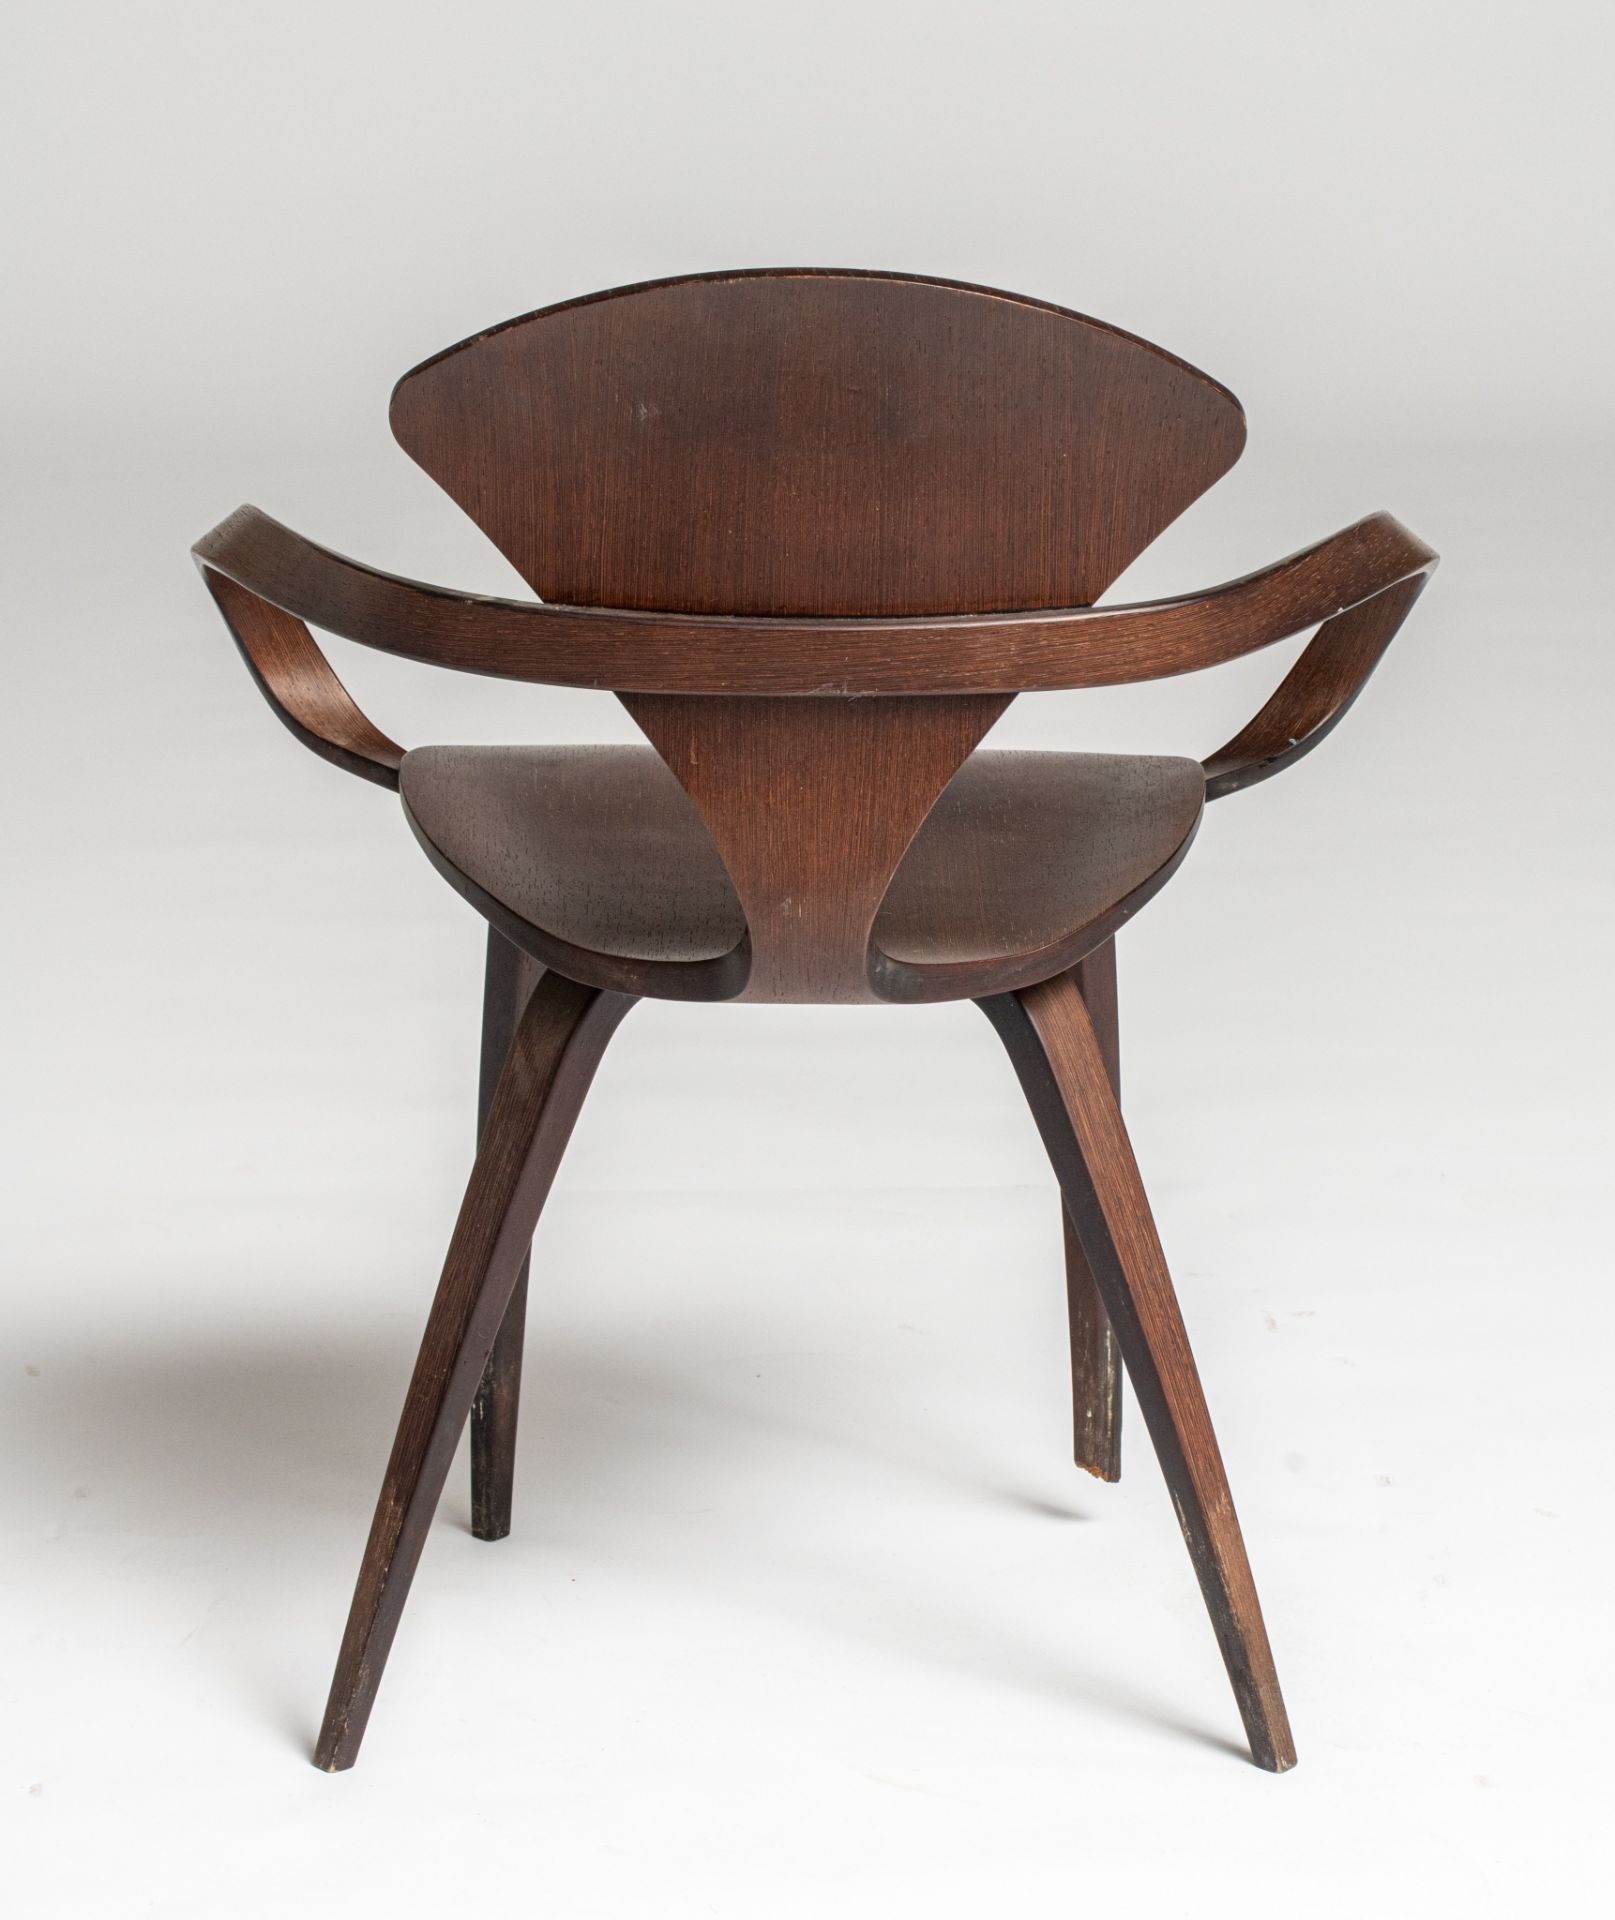 A vintage rosewood Pretzel chair by George Nelson, H 79,5 - W 67 cm - Image 6 of 13